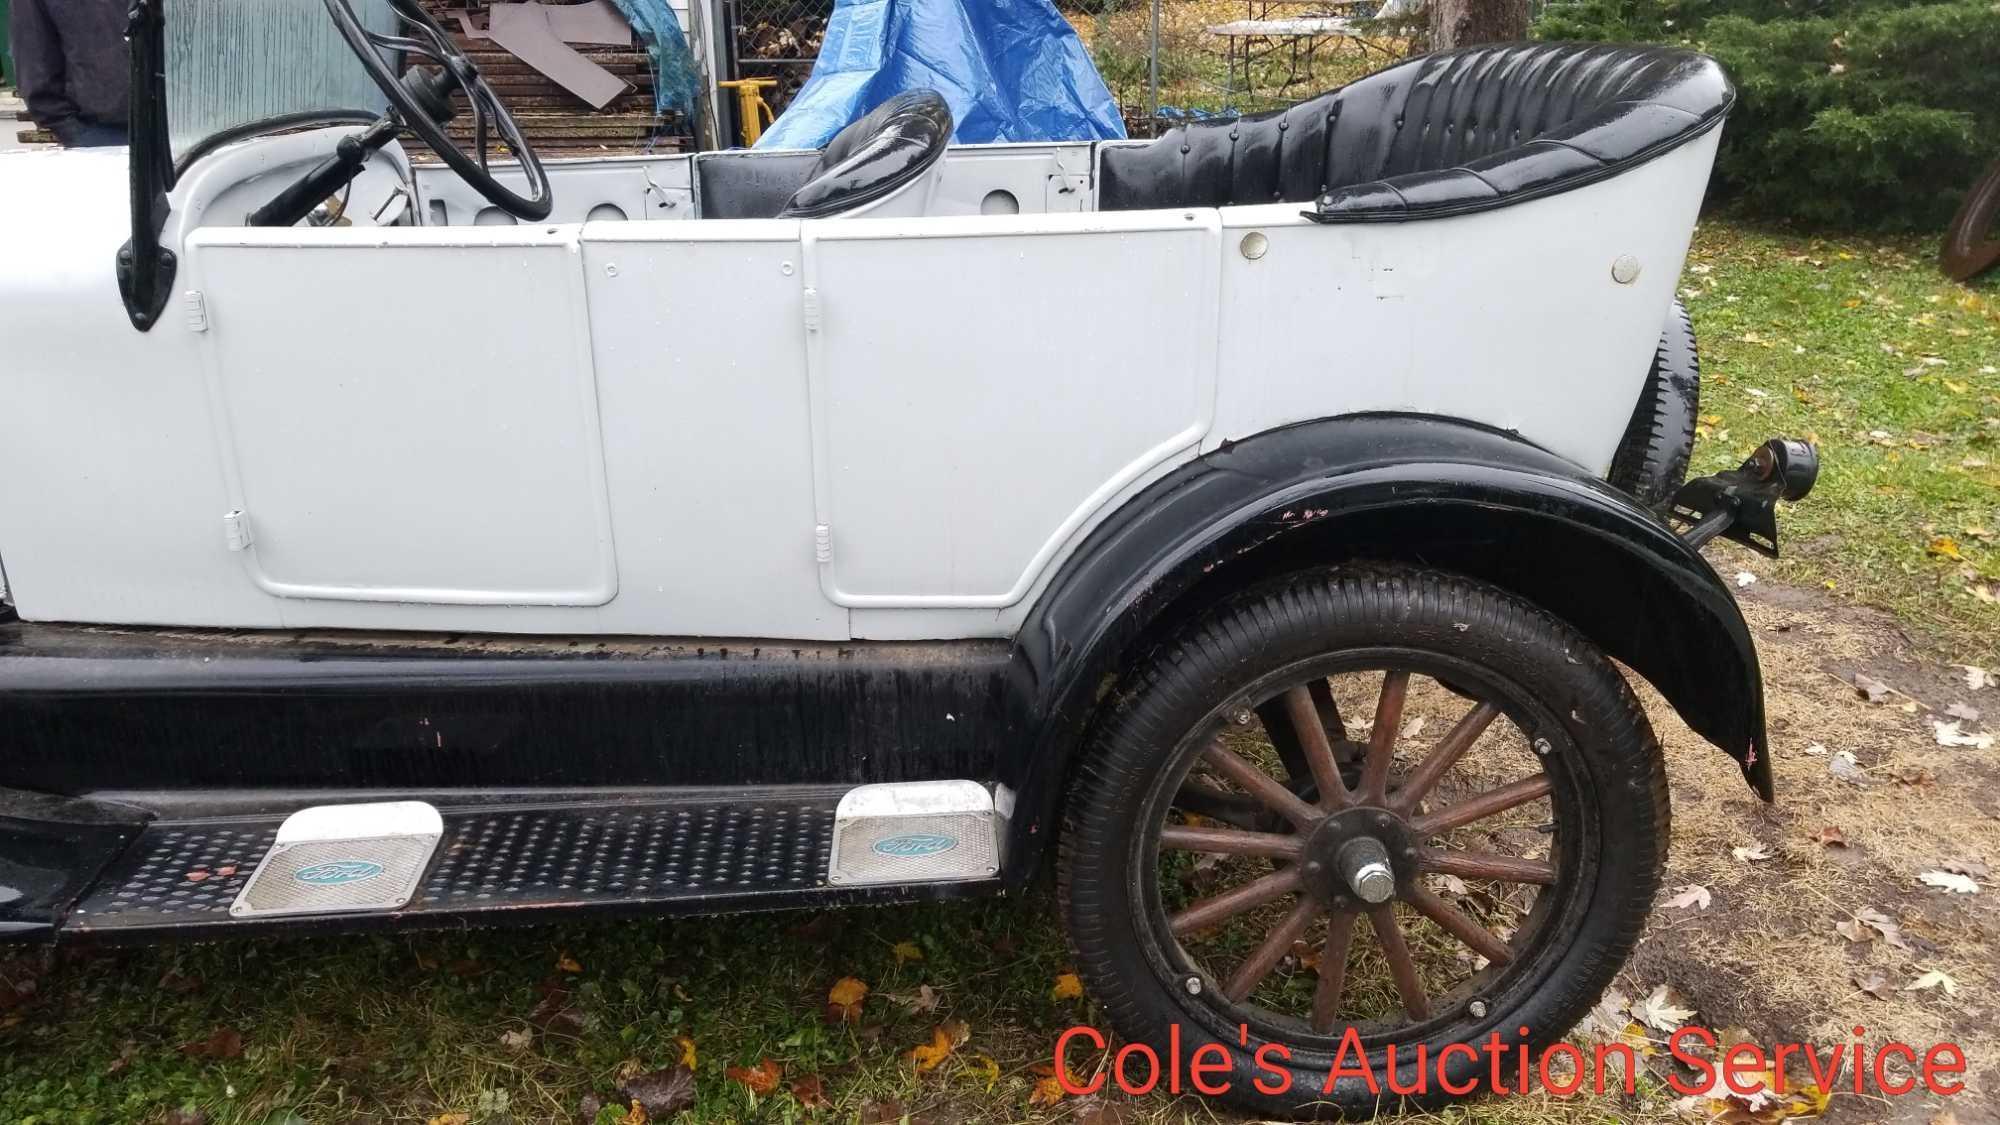 1926 Ford model T that looks to be in great condition. Ran and drove when parked. See photos for